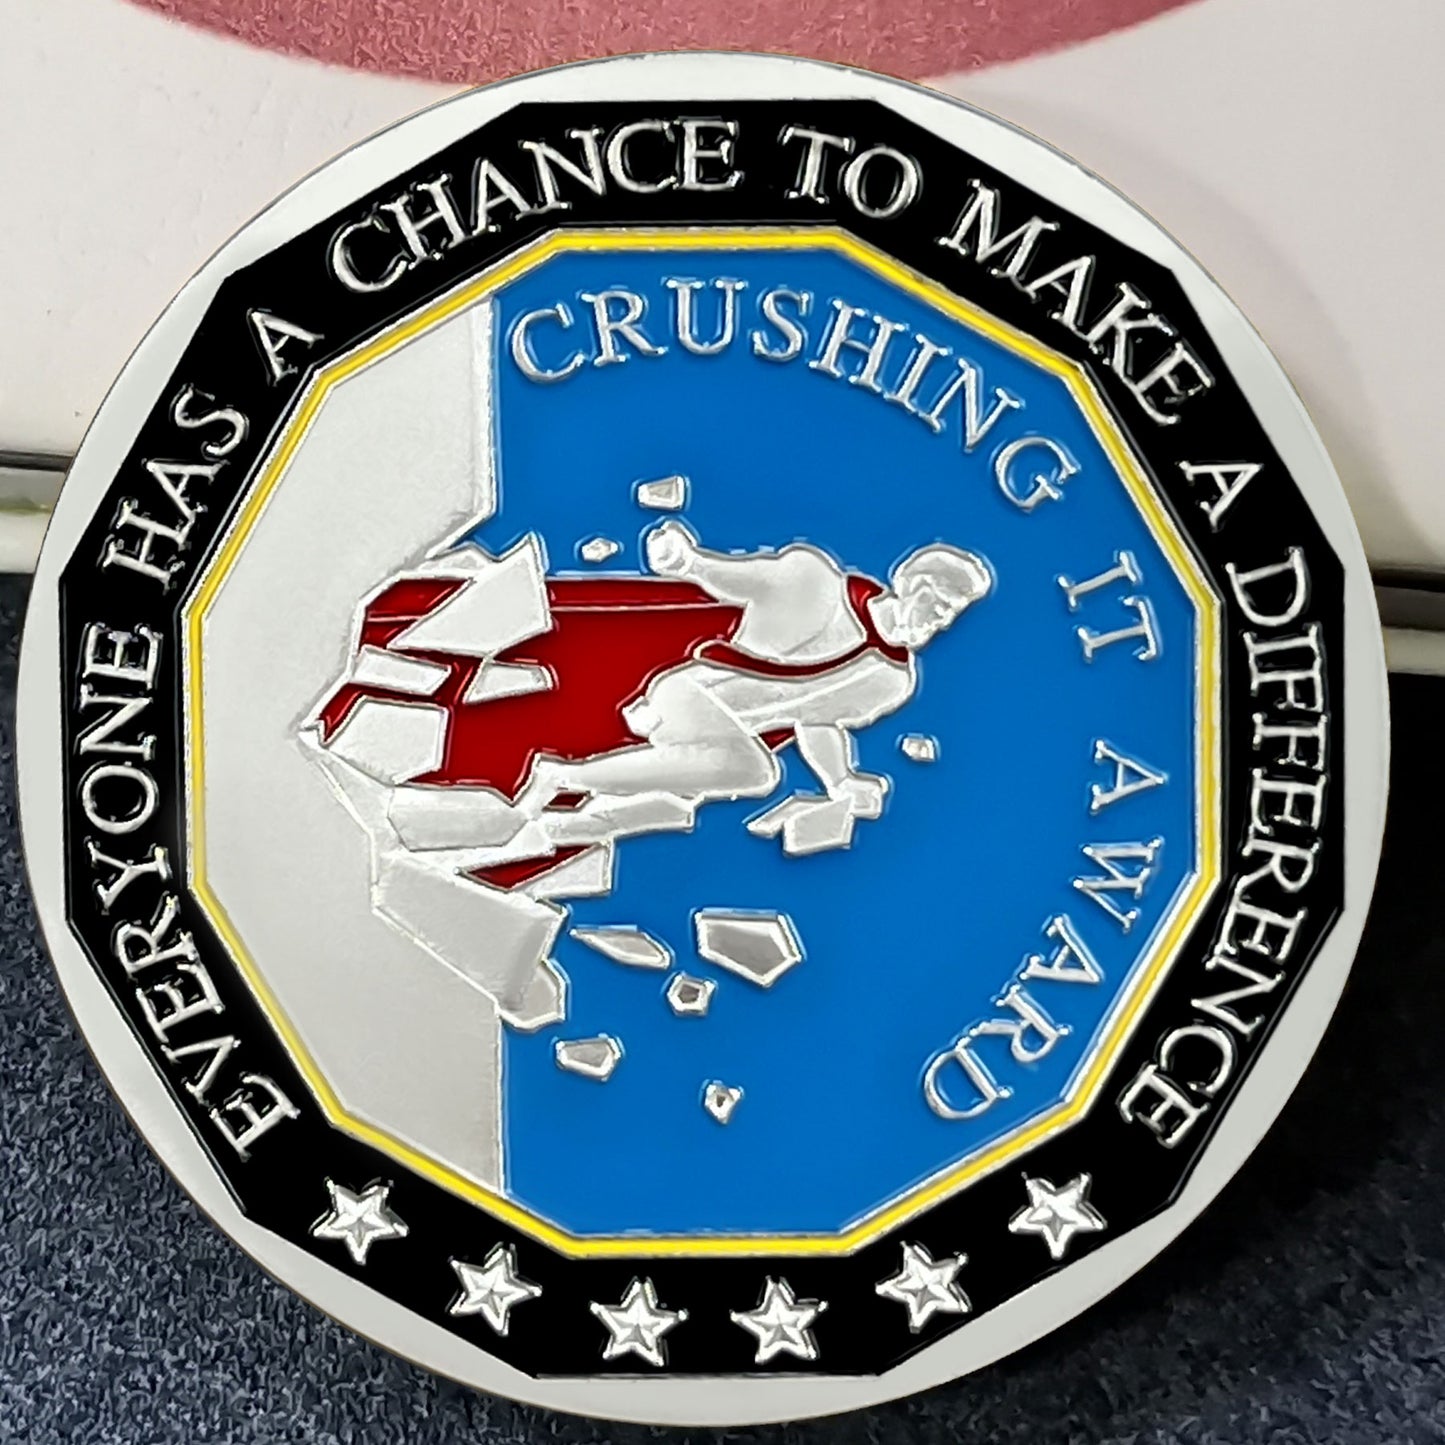 Encouragement Challenge Coin-employee Appreciation Gifts Inspirational Thank You Coin for Students and Cowokers-Break Through Difficulties